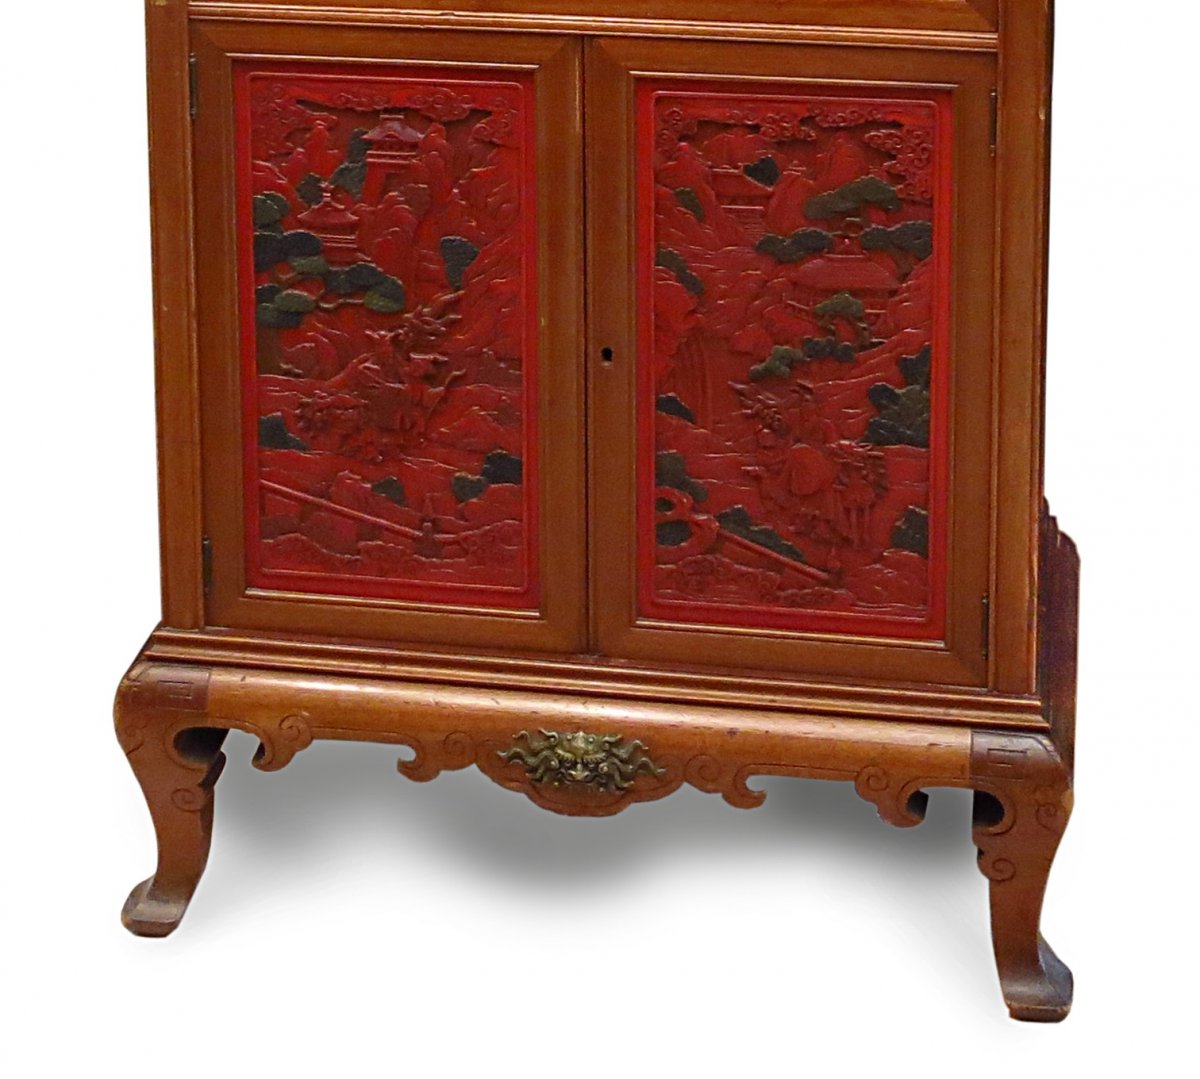 Chinese-style Mahogany And Beijing Lacquer Display Case, End Of 19th Century.-photo-1